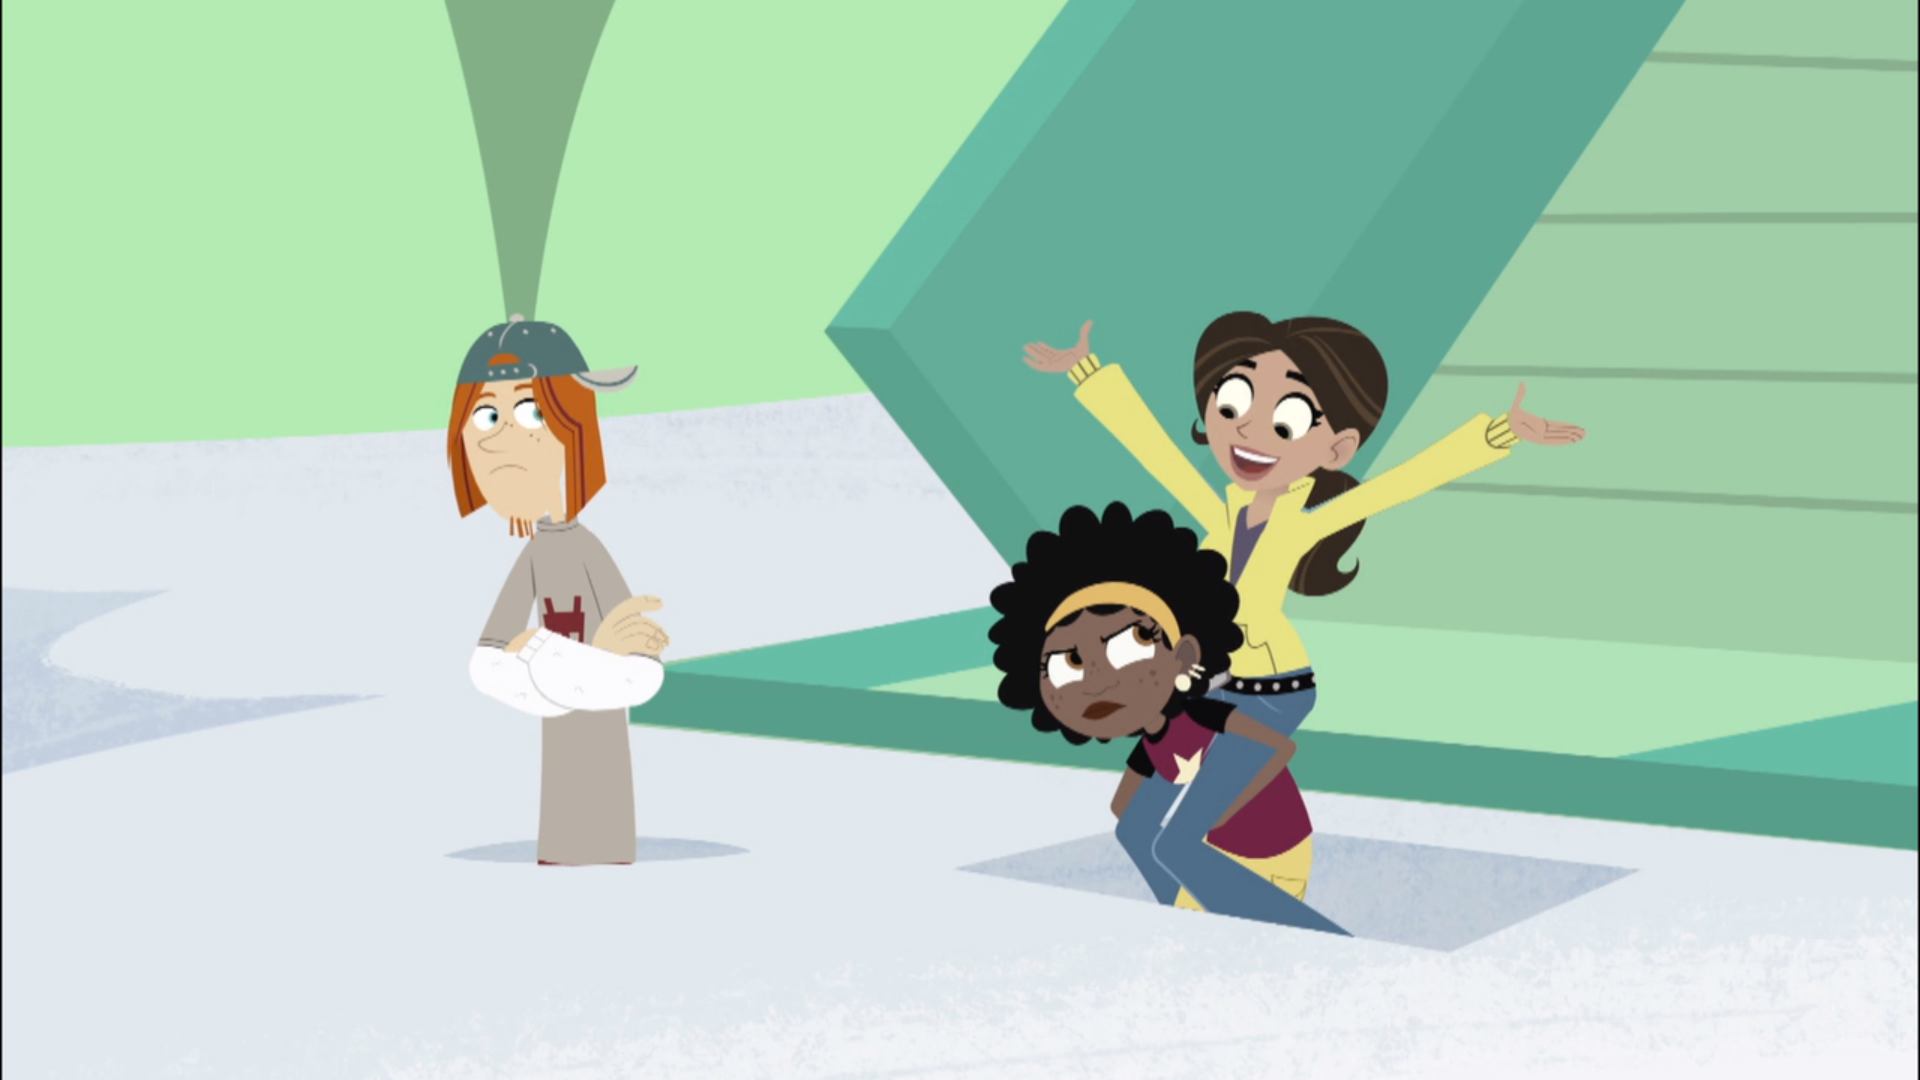 Gallery of Category Season 1 Episode Galleries Kratts Wiki.